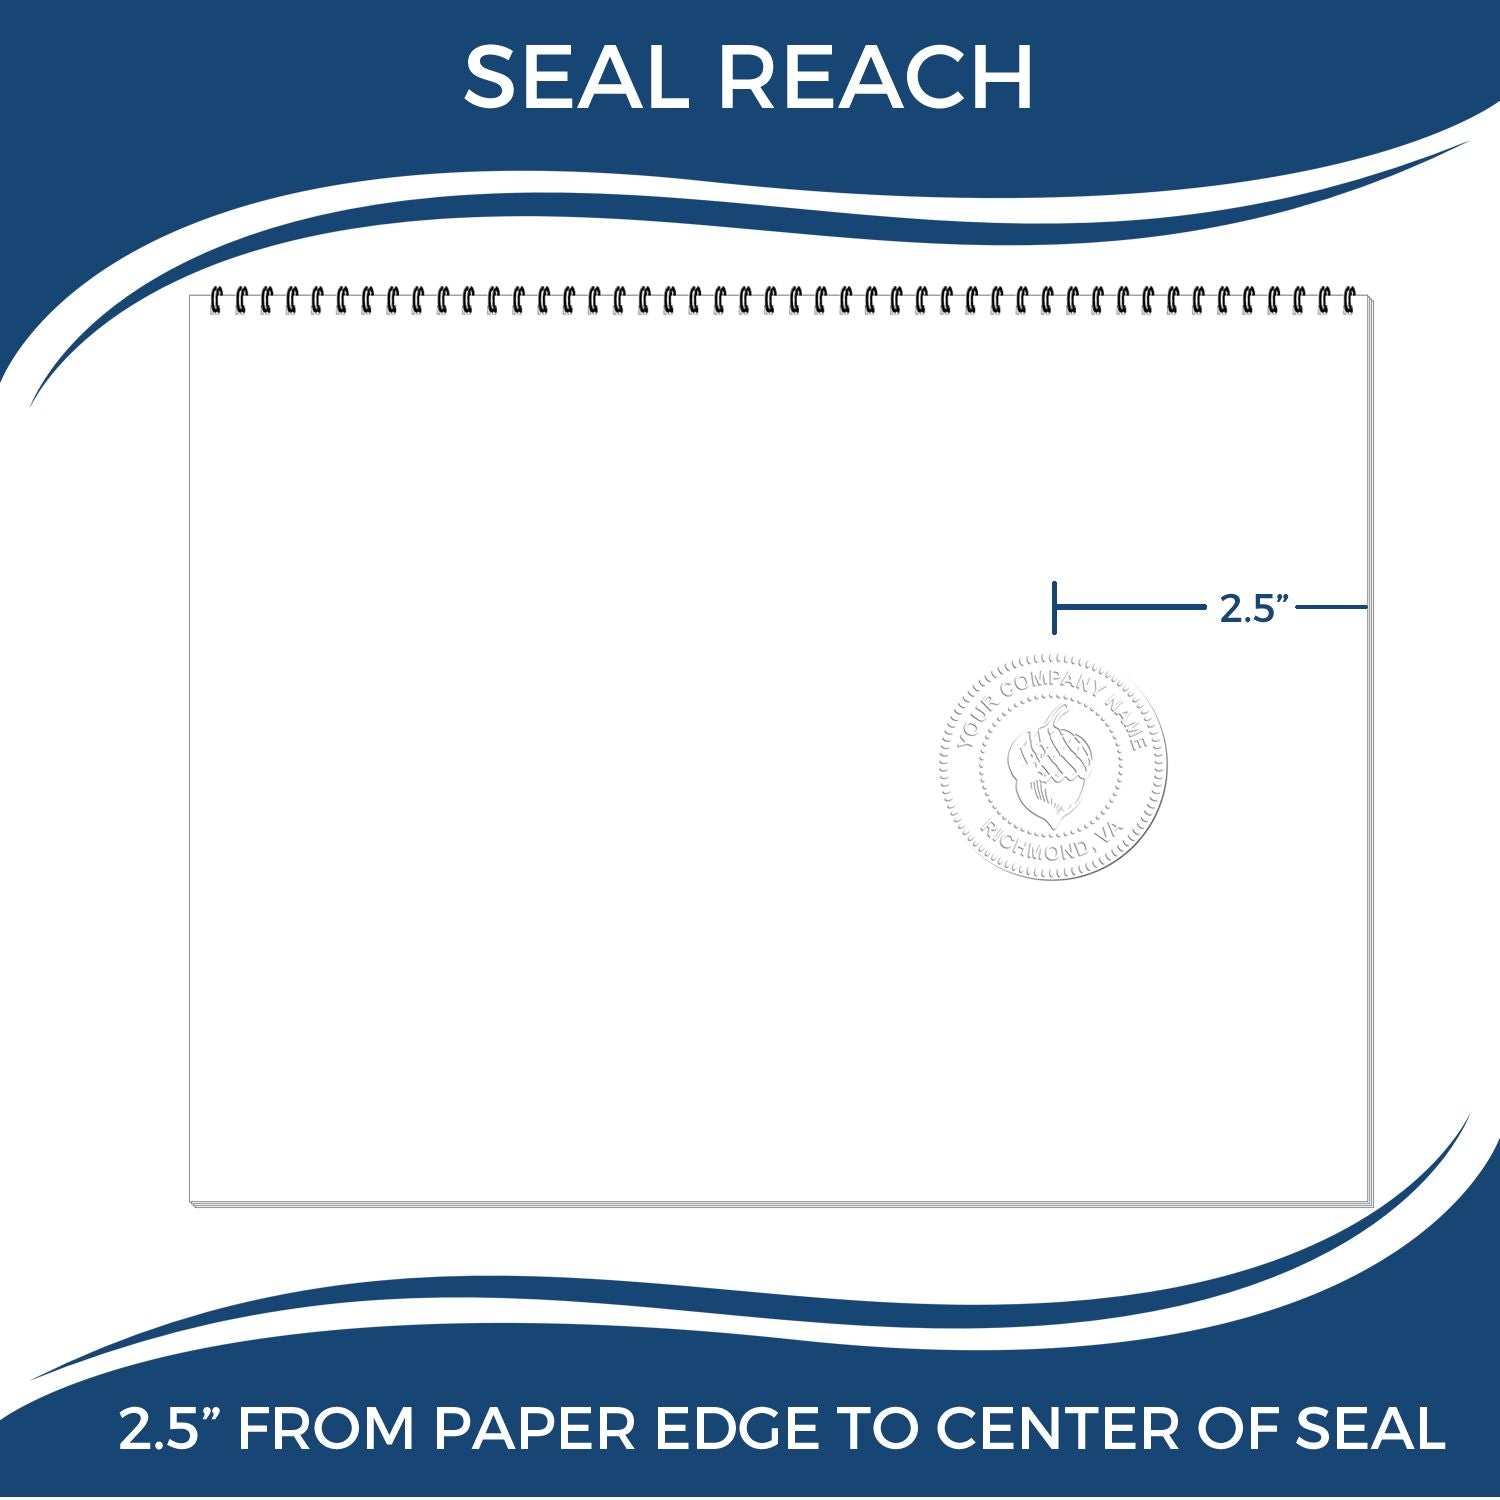 An infographic showing the seal reach which is represented by a ruler and a miniature seal image of the Heavy Duty Cast Iron West Virginia Geologist Seal Embosser